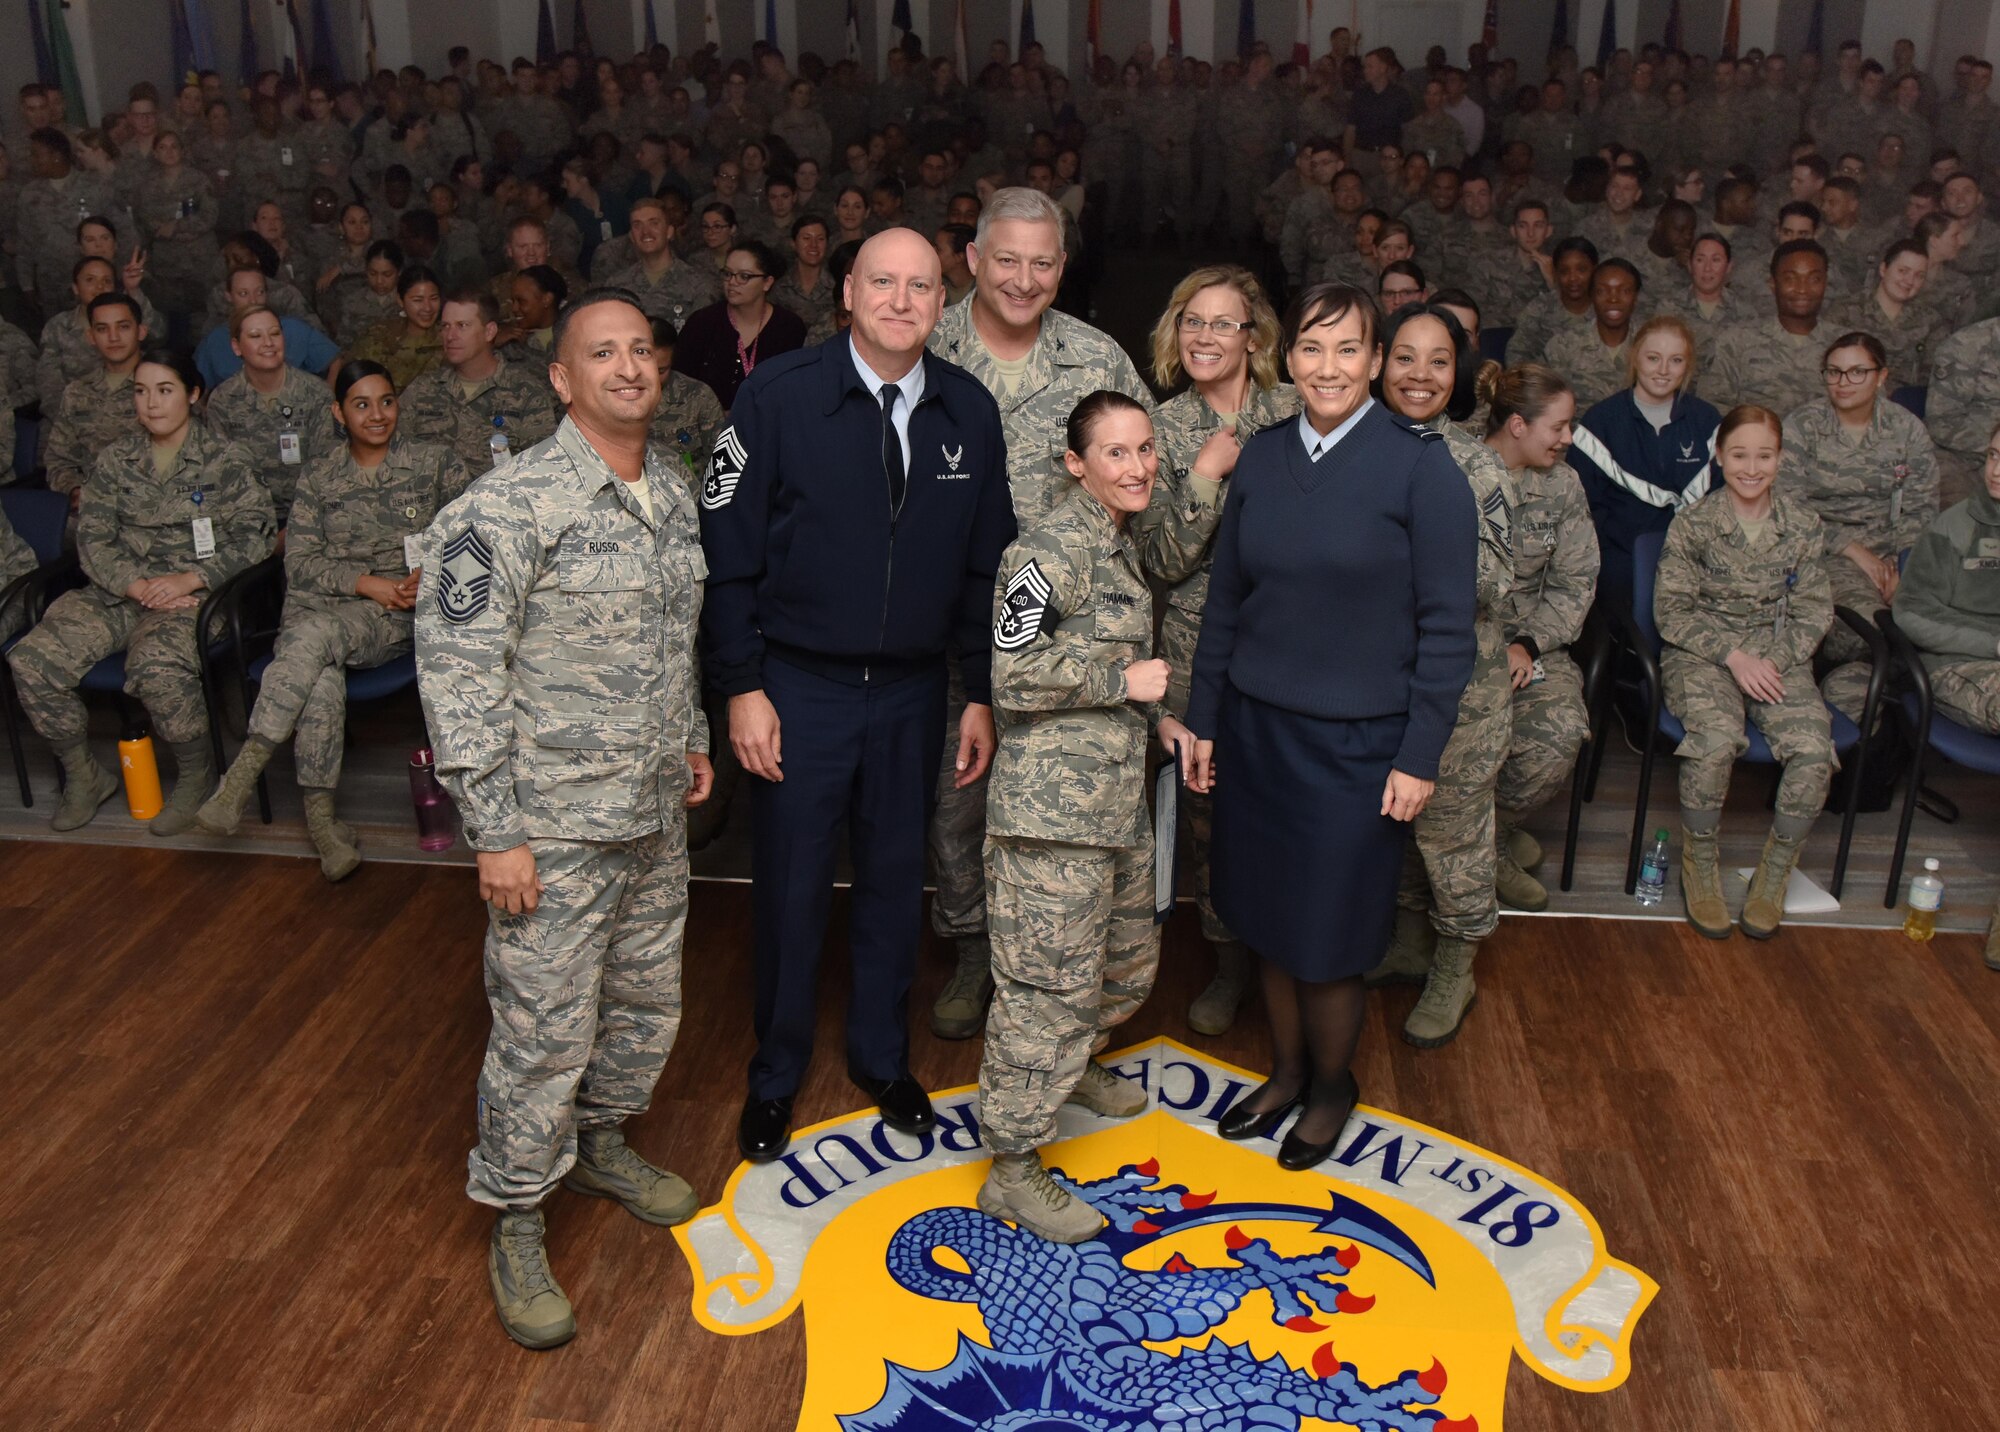 U.S. Air Force Senior Master Sgt. Katie Hammonds, 81st Medical Support Squadron medical logistics flight chief, poses for a group photo with base leadership upon the notification of her promotion to the rank of chief master sergeant at Keesler Air Force Base, Mississippi, Dec. 4, 2018. Five senior master sgts. were notified and congratulated for their promotion by the base's leadership and chiefs. (U.S. Air Force photo by Kemberly Groue)